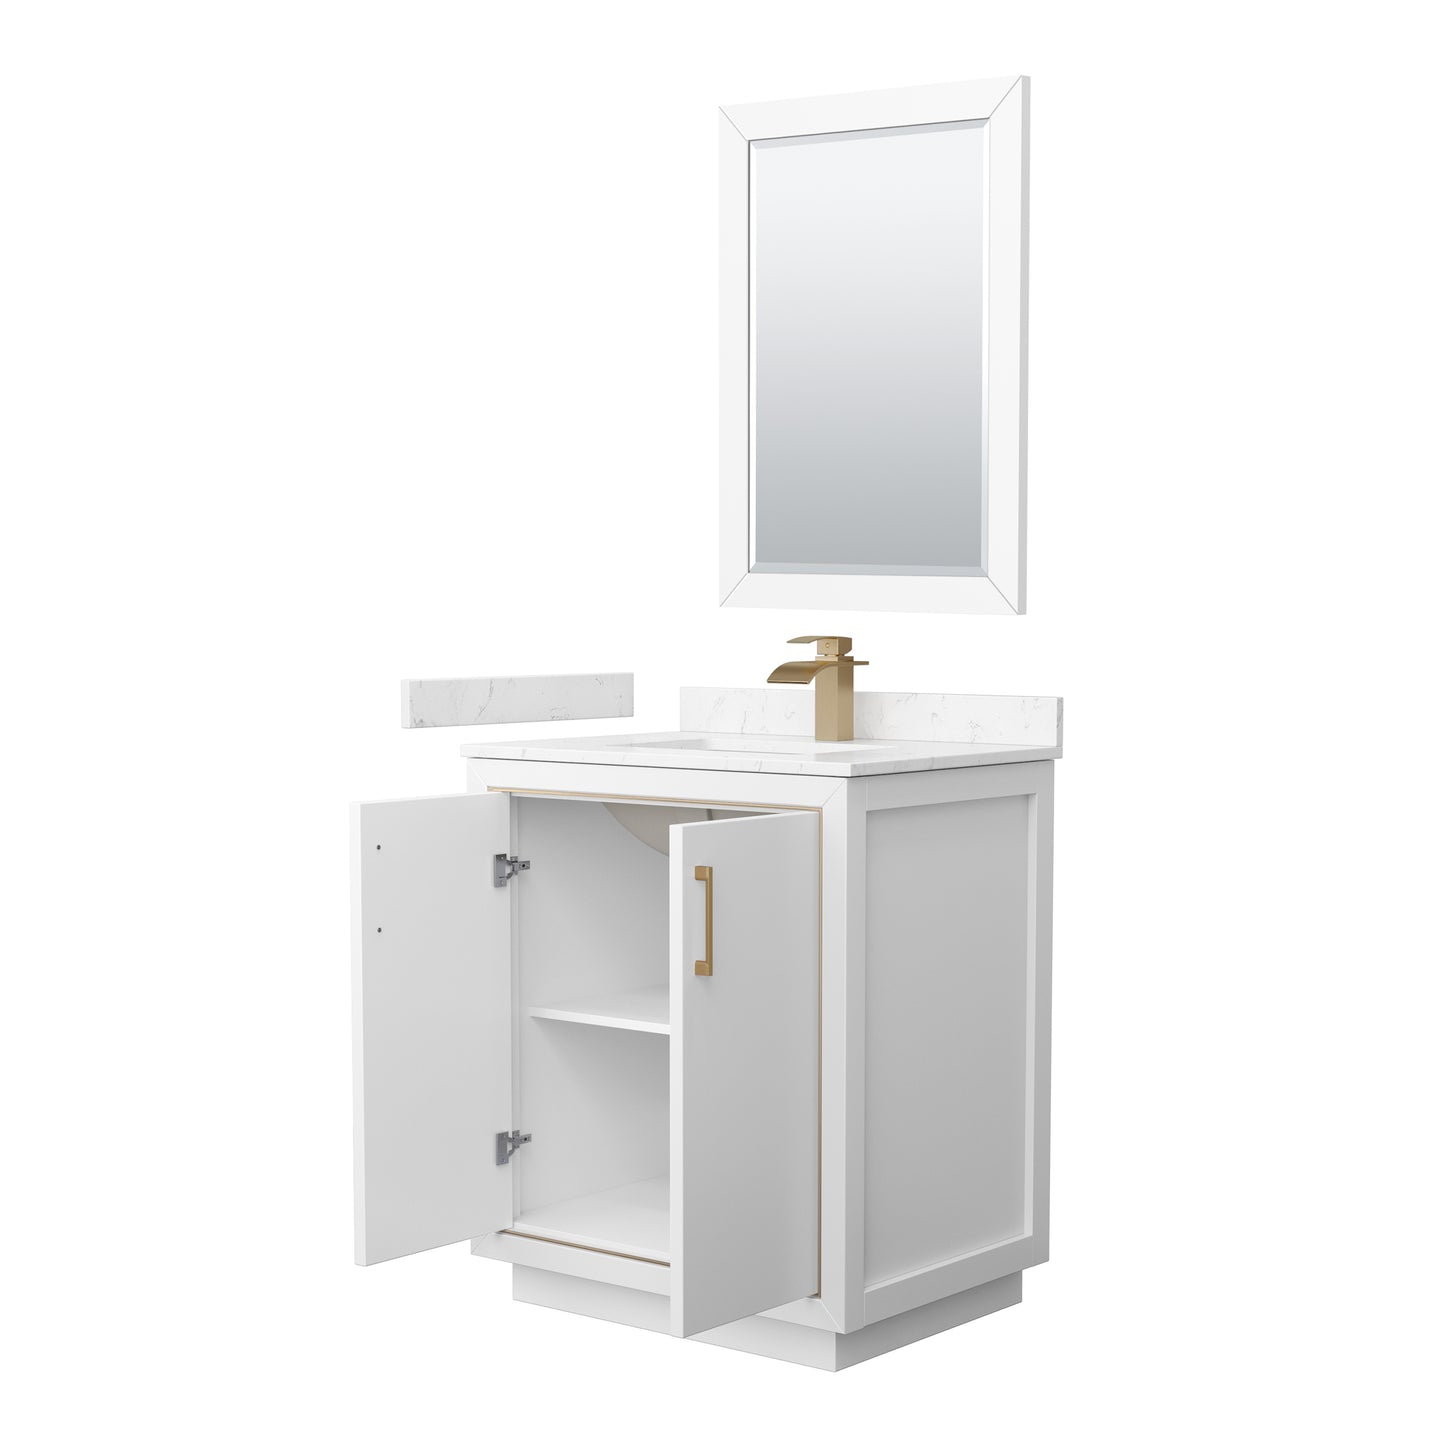 Wyndham Icon 30 Inch Single Bathroom Vanity in White with Carrara Cultured Marble Countertop, Undermount Square Sink, Satin Bronze Trim and 24 Inch Mirror - Luxe Bathroom Vanities